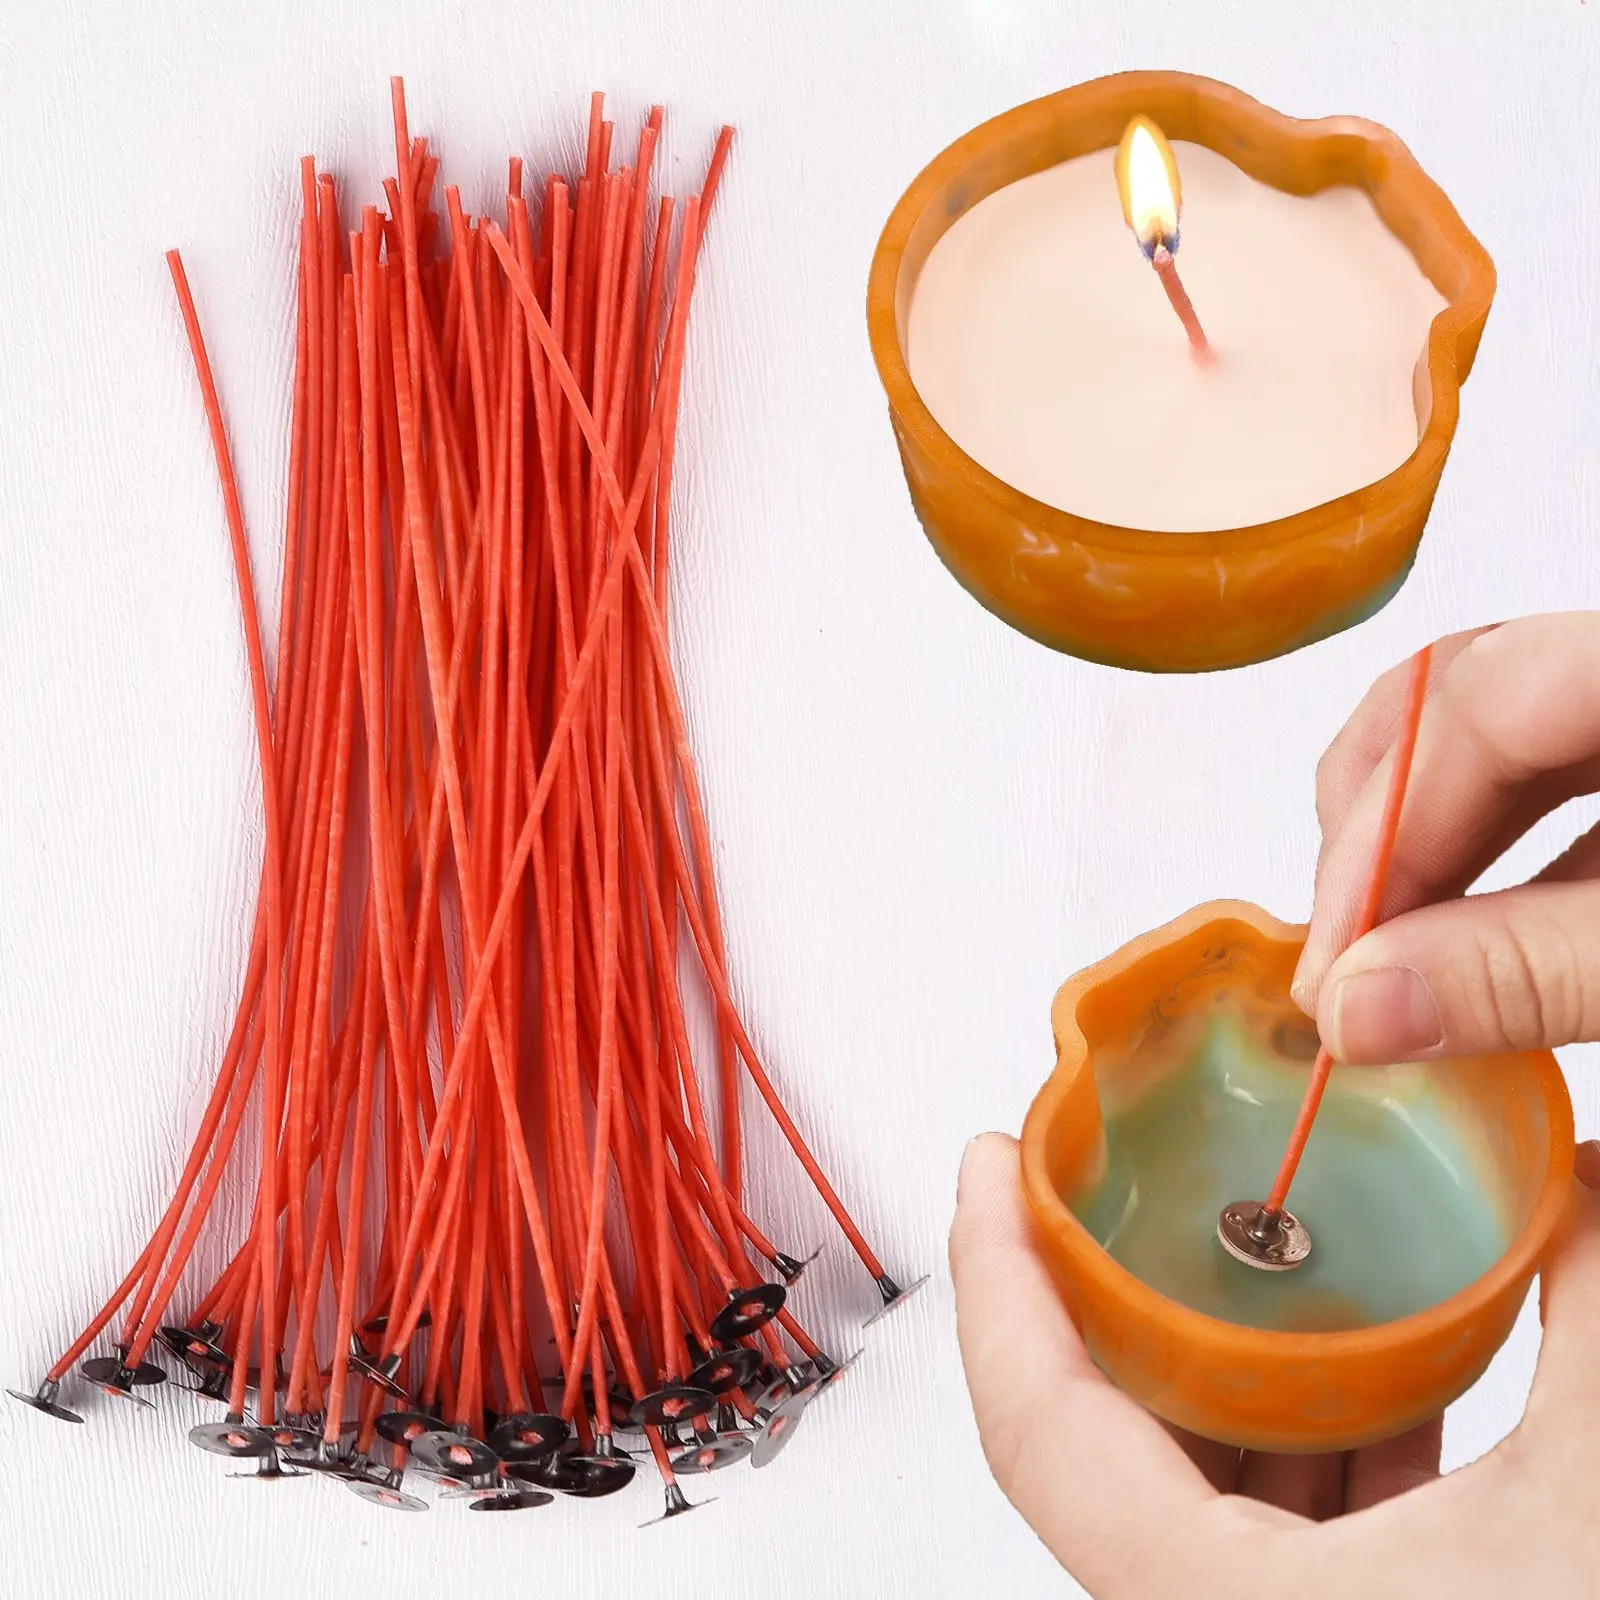 50Pcs Candle Wicks Pre-Waxed Wick 4 Inch For Candles Cotton Core DIY Making